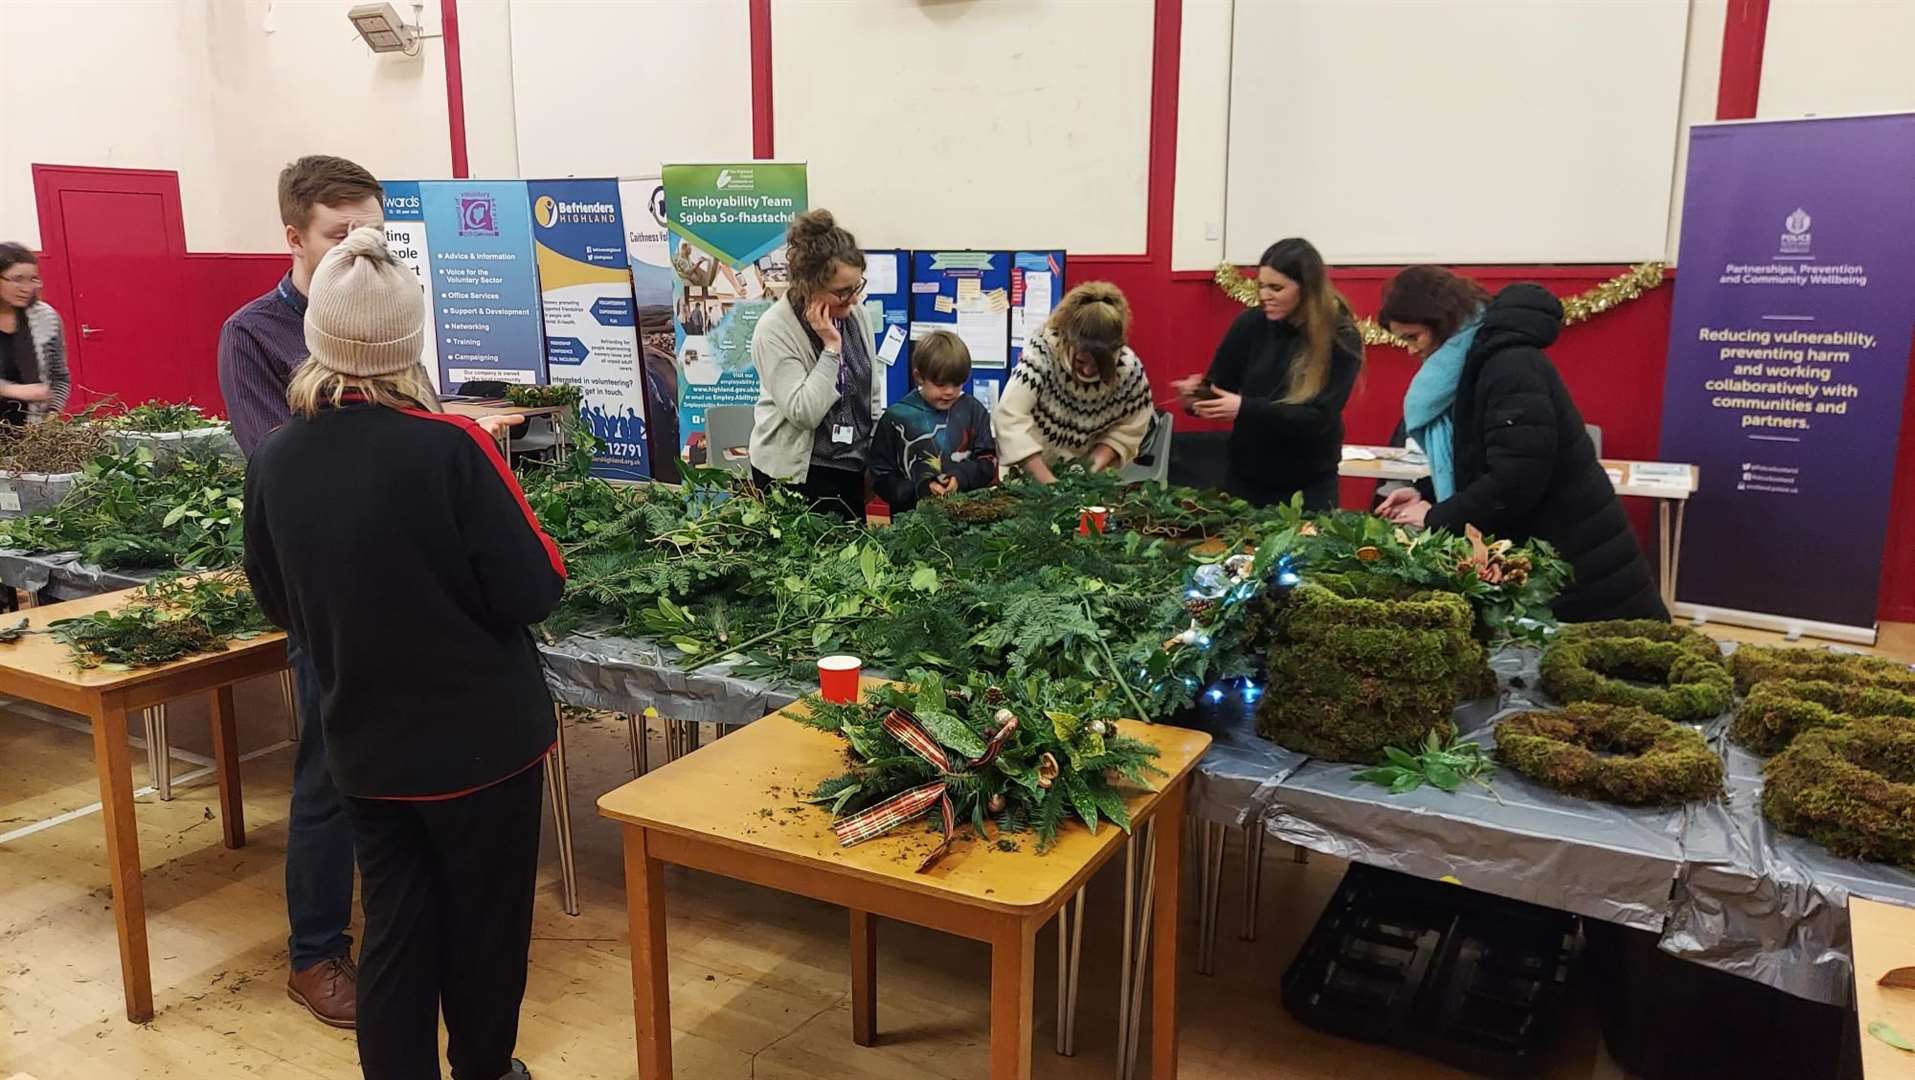 Making festive wreaths was part of the event in the Drill Hall in Castletown